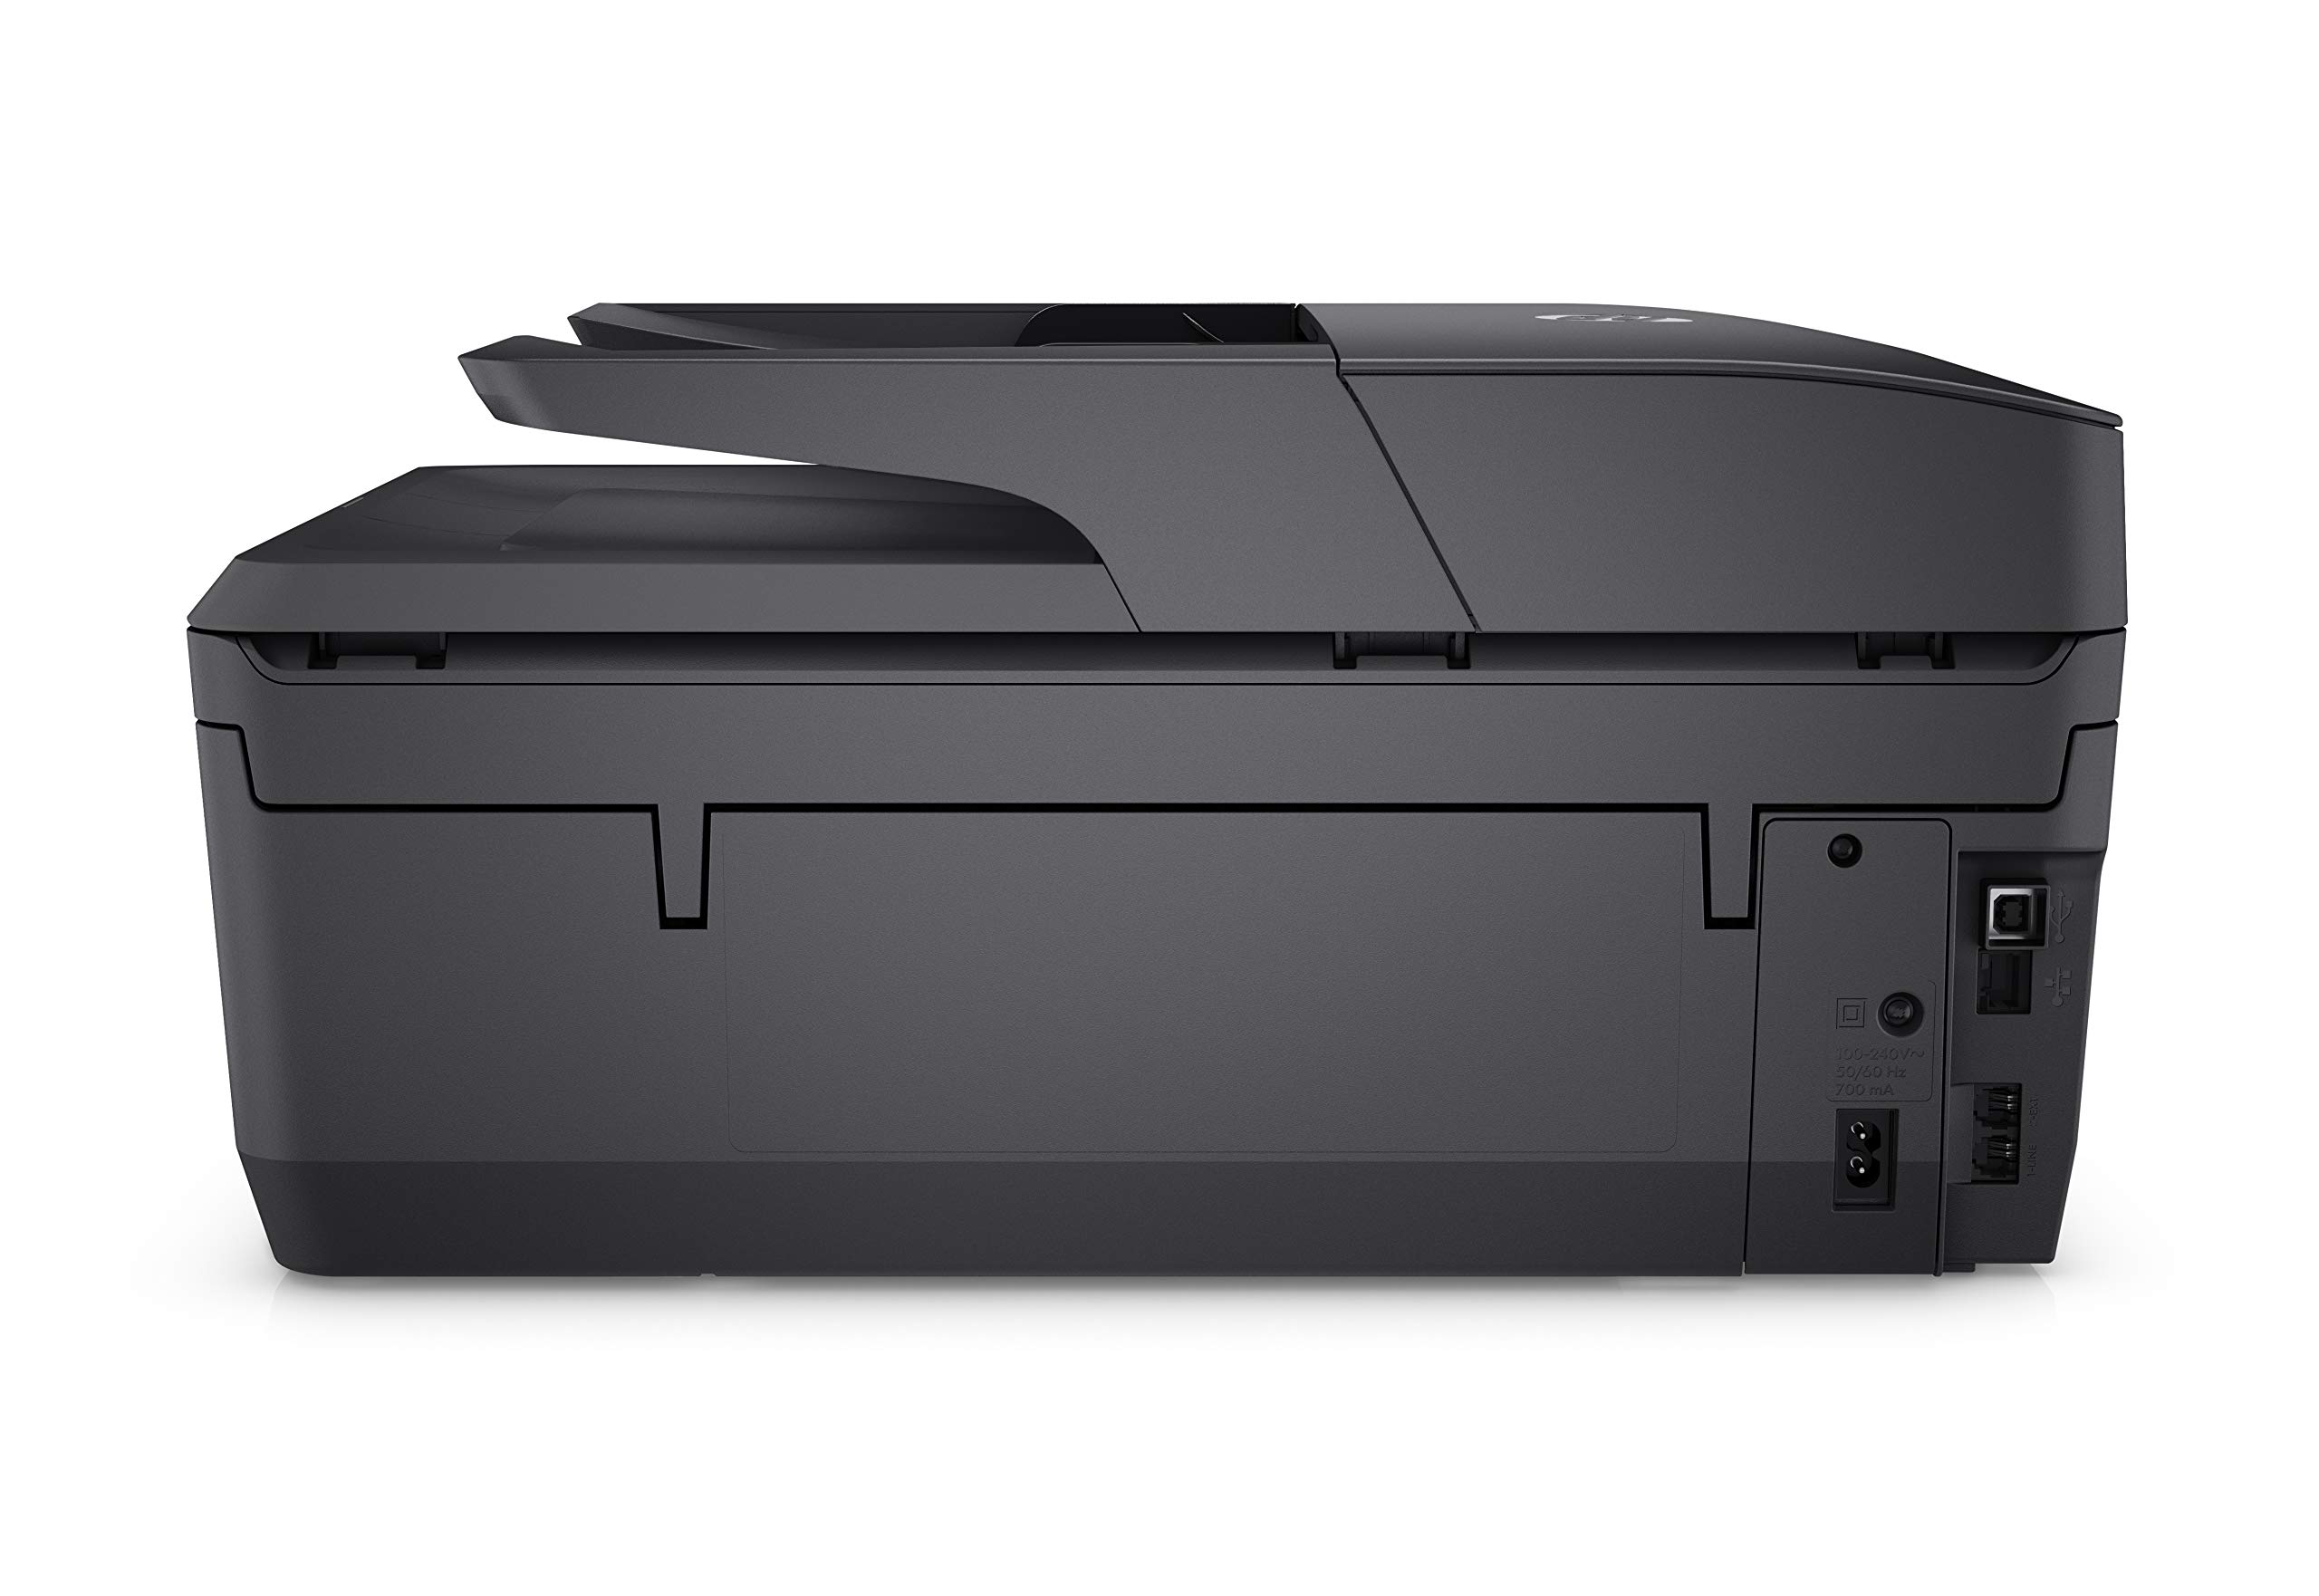 HP OfficeJet Pro 6978 All-in-One Wireless Color Printer, HP Instant Ink, Works with Alexa (T0F29A)